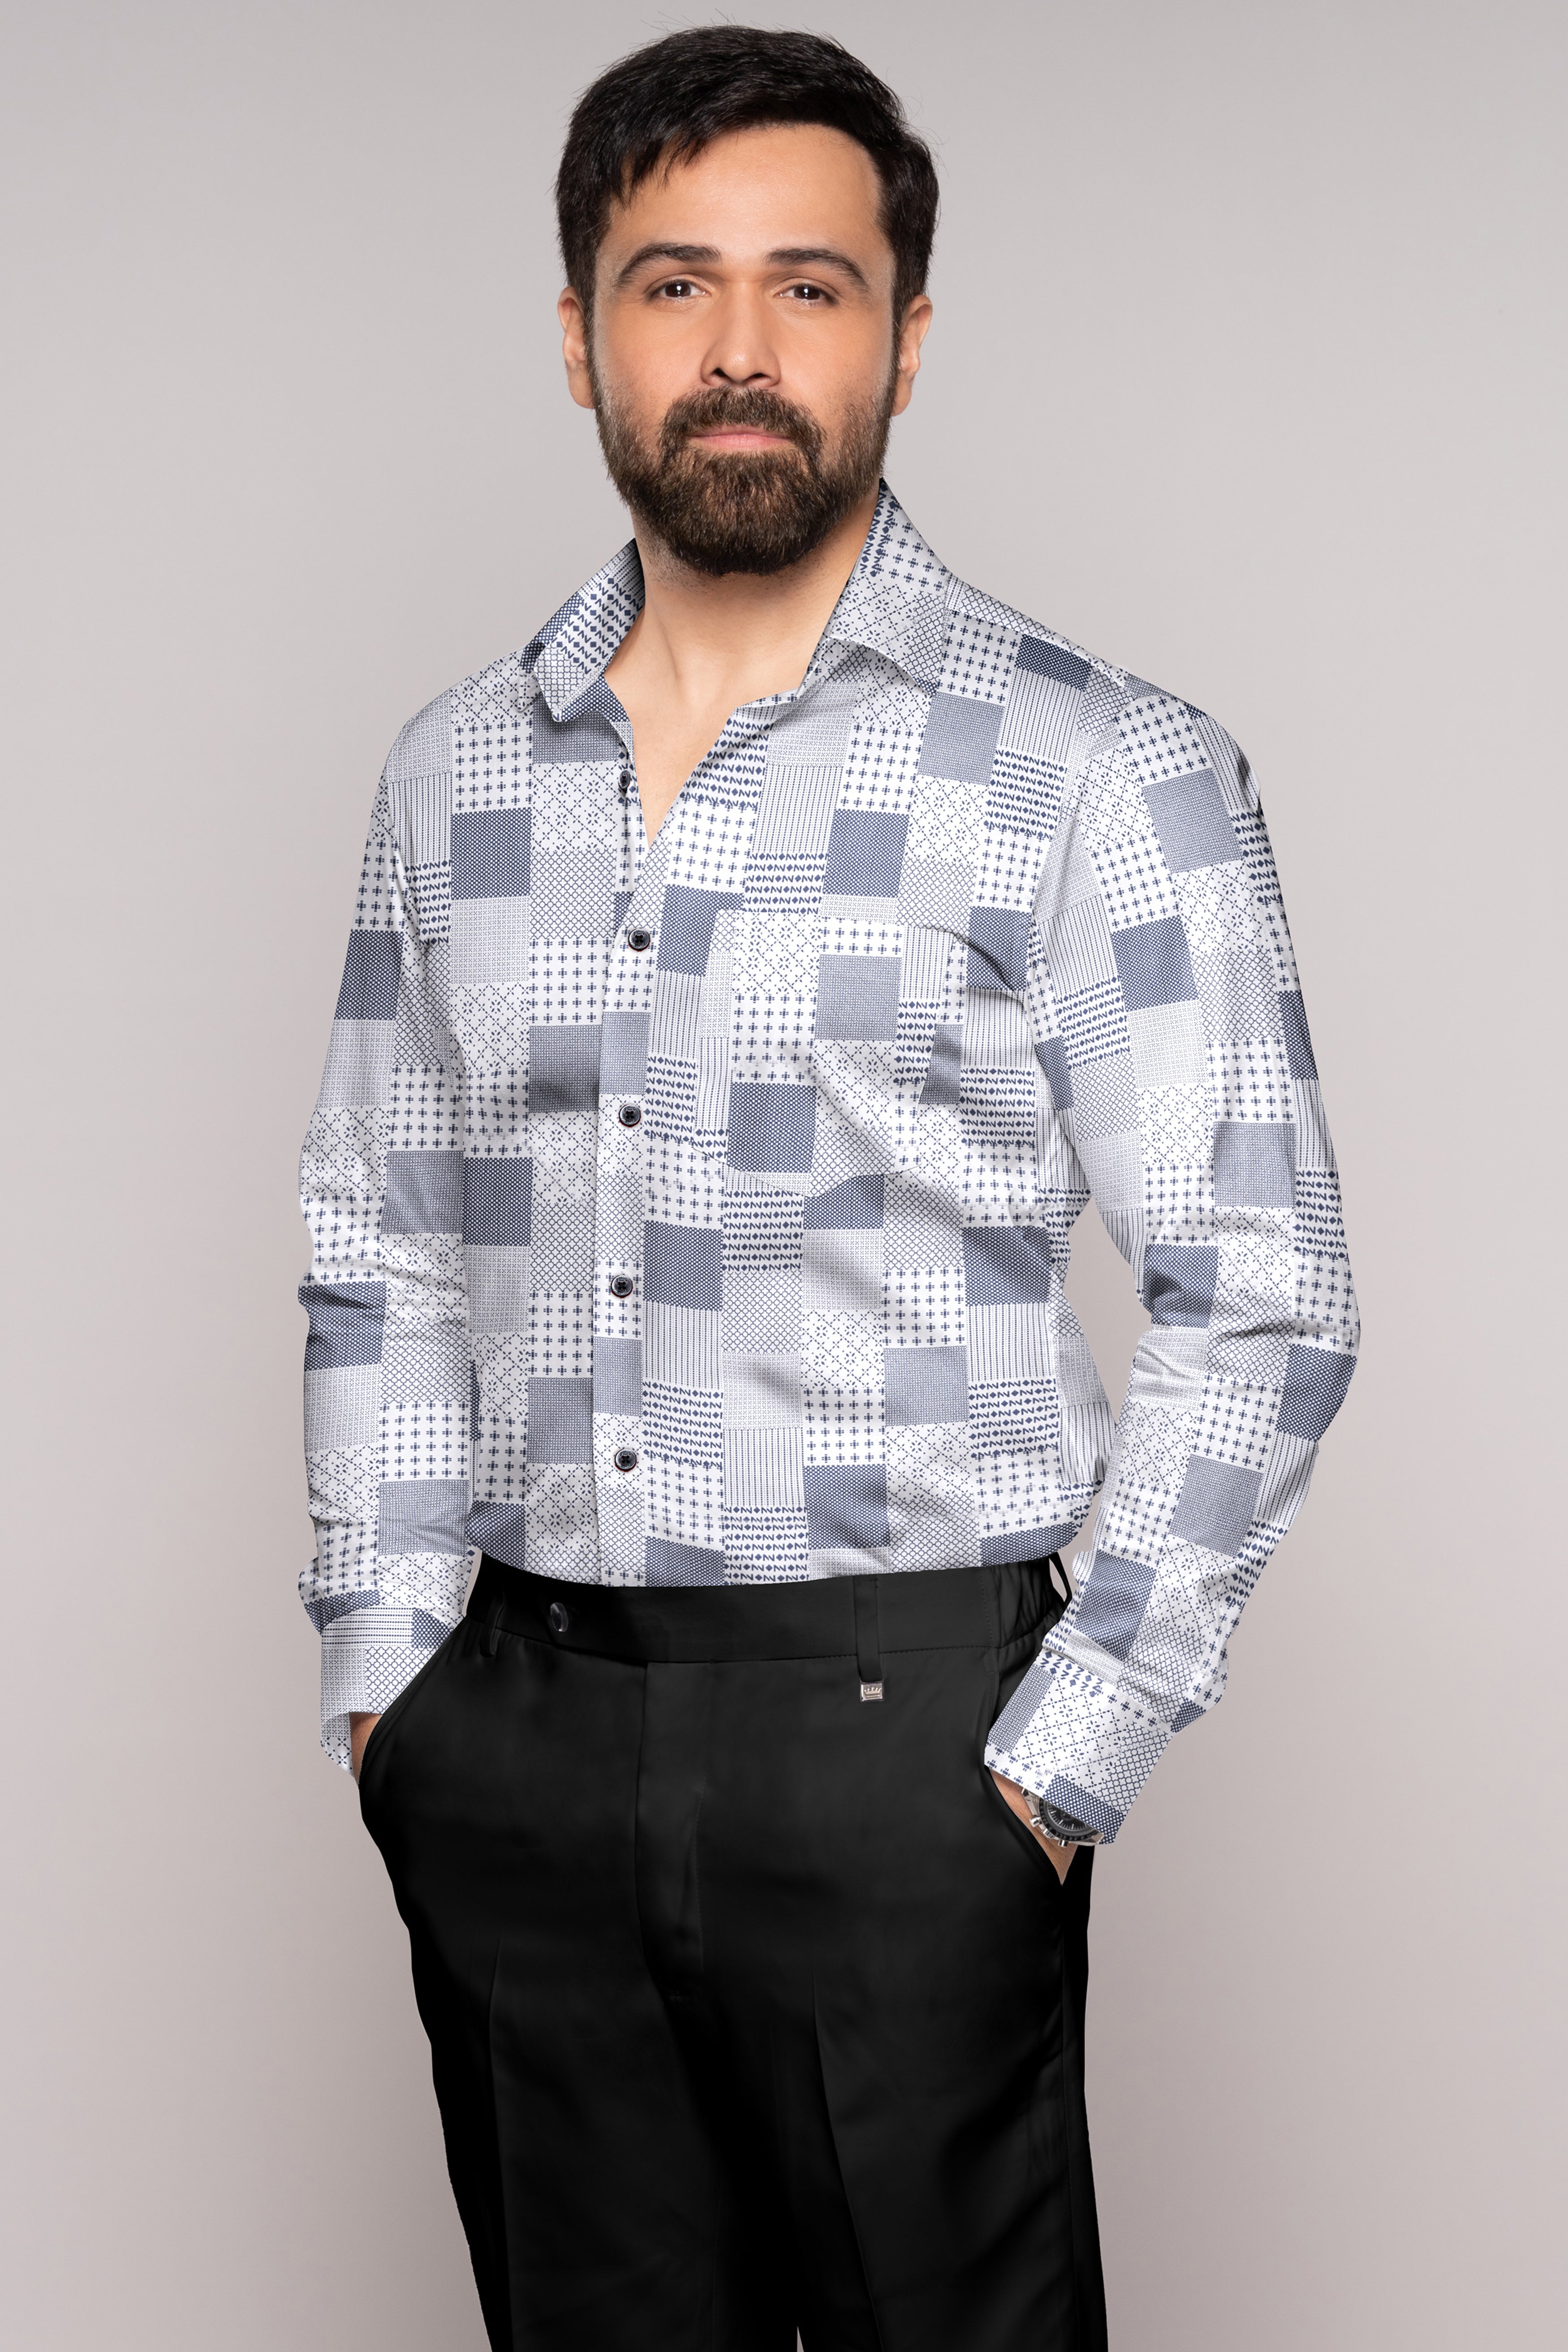 Bright White with Bluewood Blue Square Printed Super Soft Premium Cotton Shirts